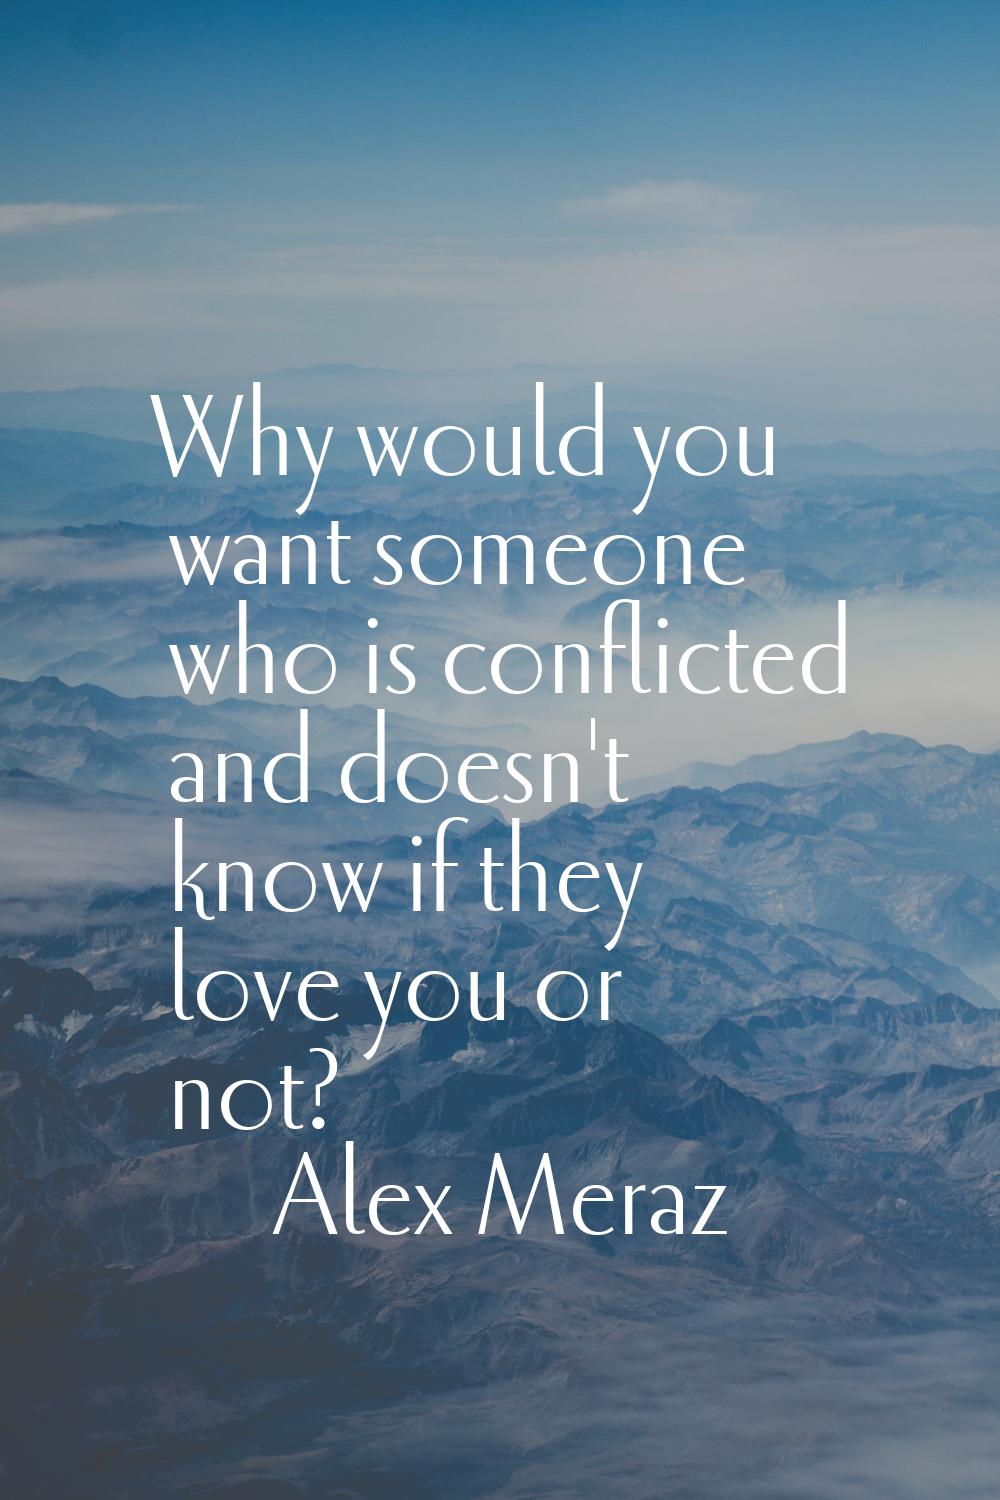 Why would you want someone who is conflicted and doesn't know if they love you or not?